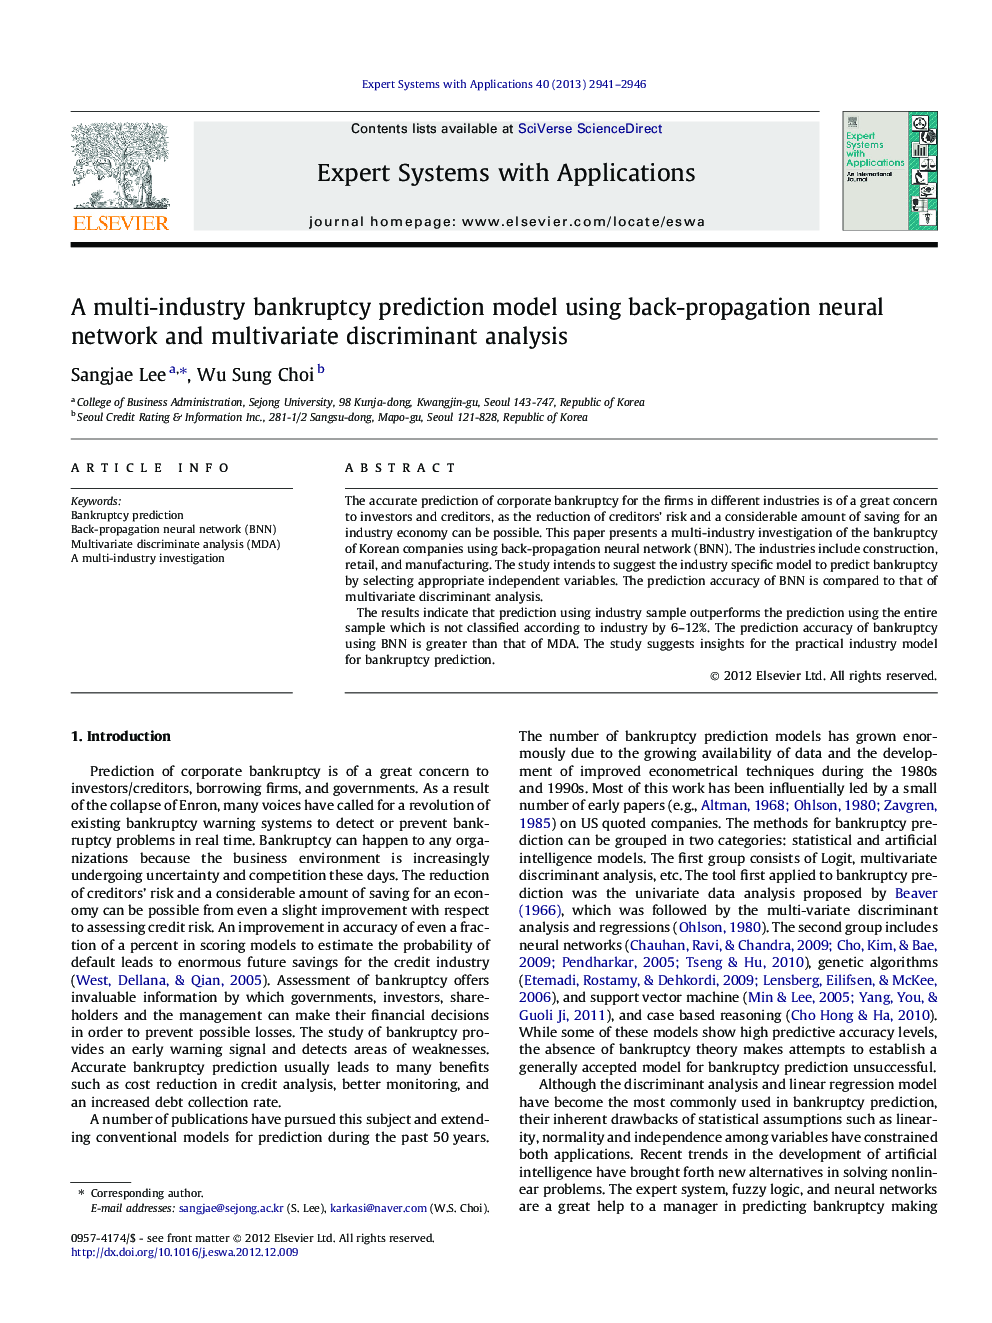 A multi-industry bankruptcy prediction model using back-propagation neural network and multivariate discriminant analysis